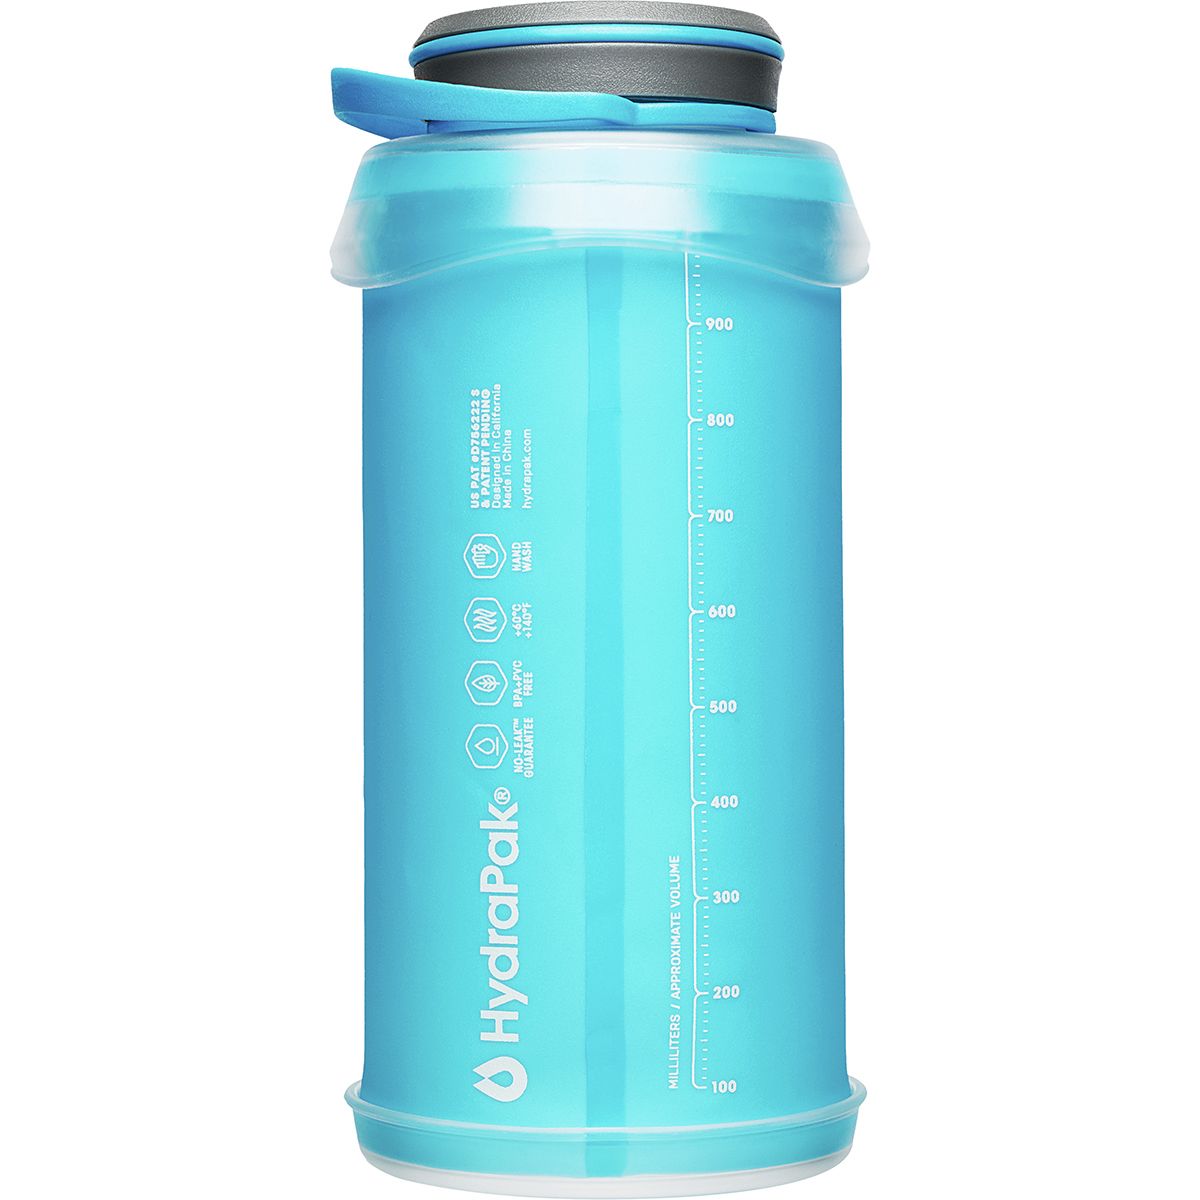 Collapsible BPA & PVC Free Hiking and Backpacking Water Bottle Hydrapak Stash 